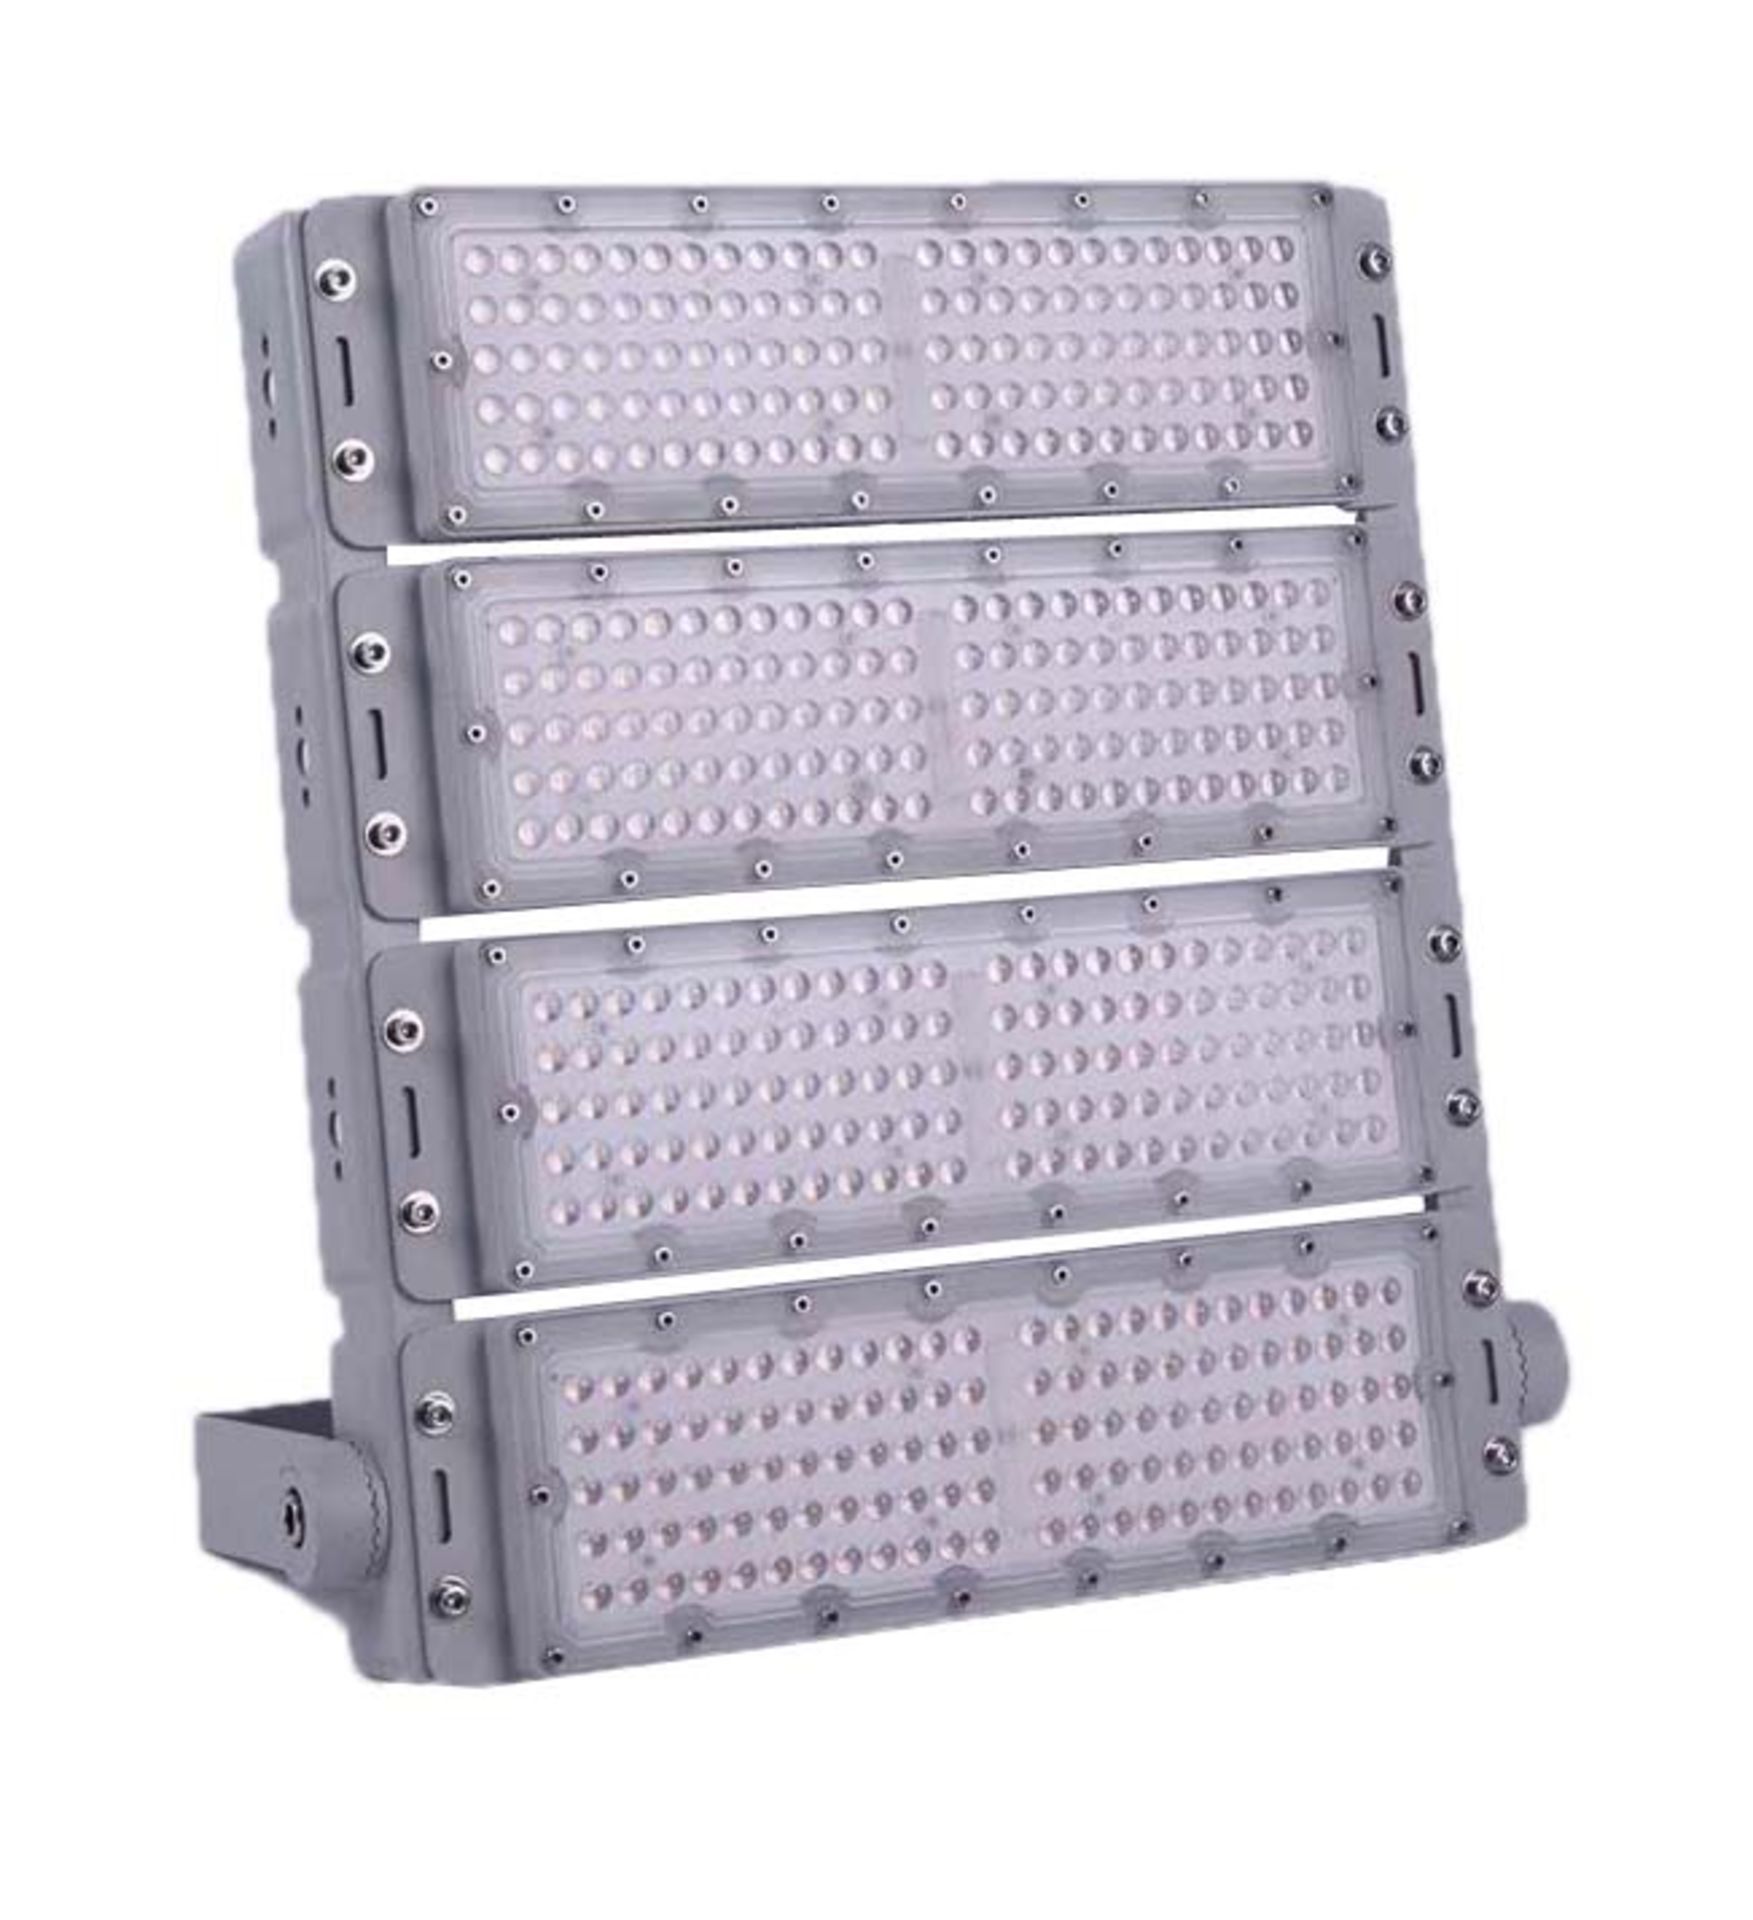 1 x LED400 Watt Flood Light Panel - For Car Parks, Security, Playing fields, Football pitches etc - Image 5 of 8